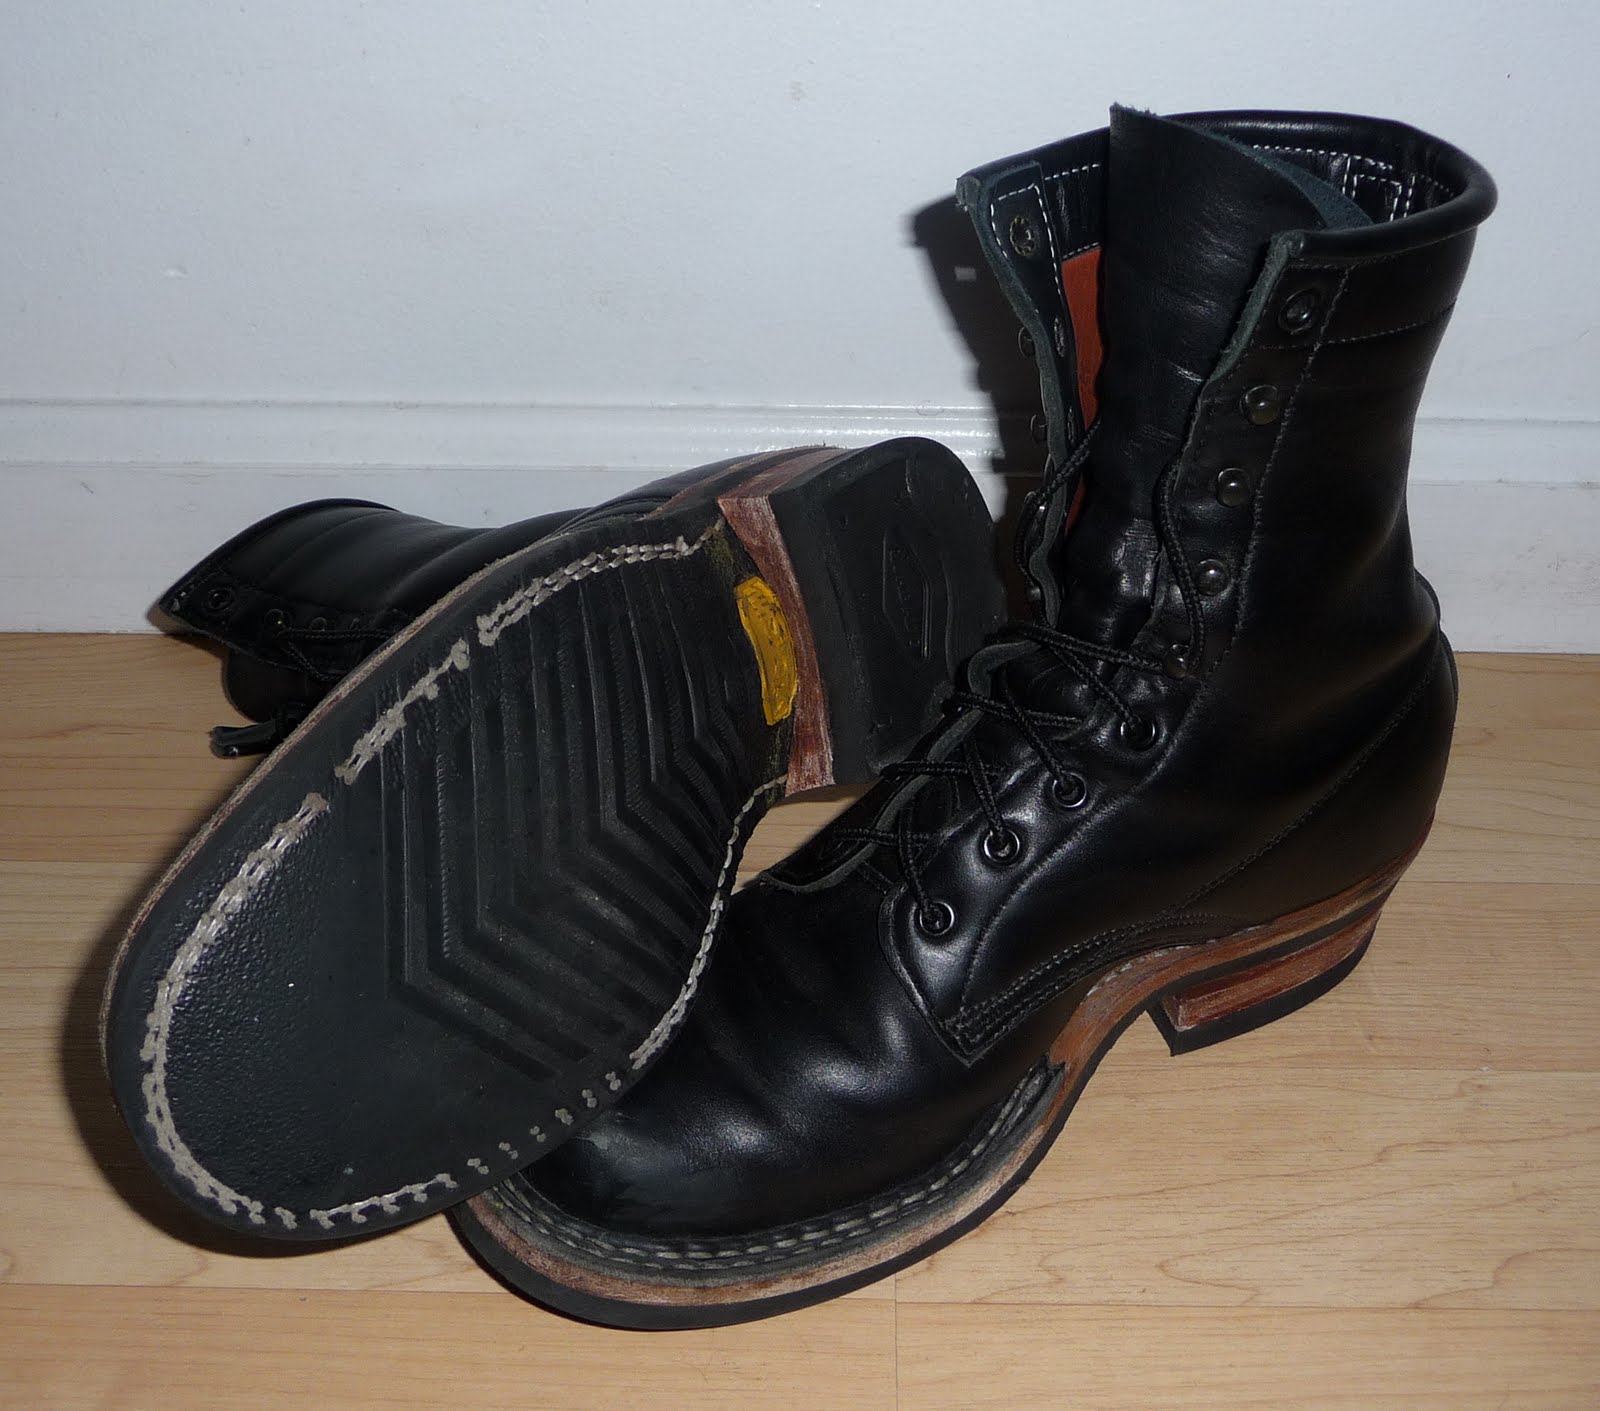 Vintage Engineer Boots: BEWARE - WHITE'S SEMI-DRESS BOOTS